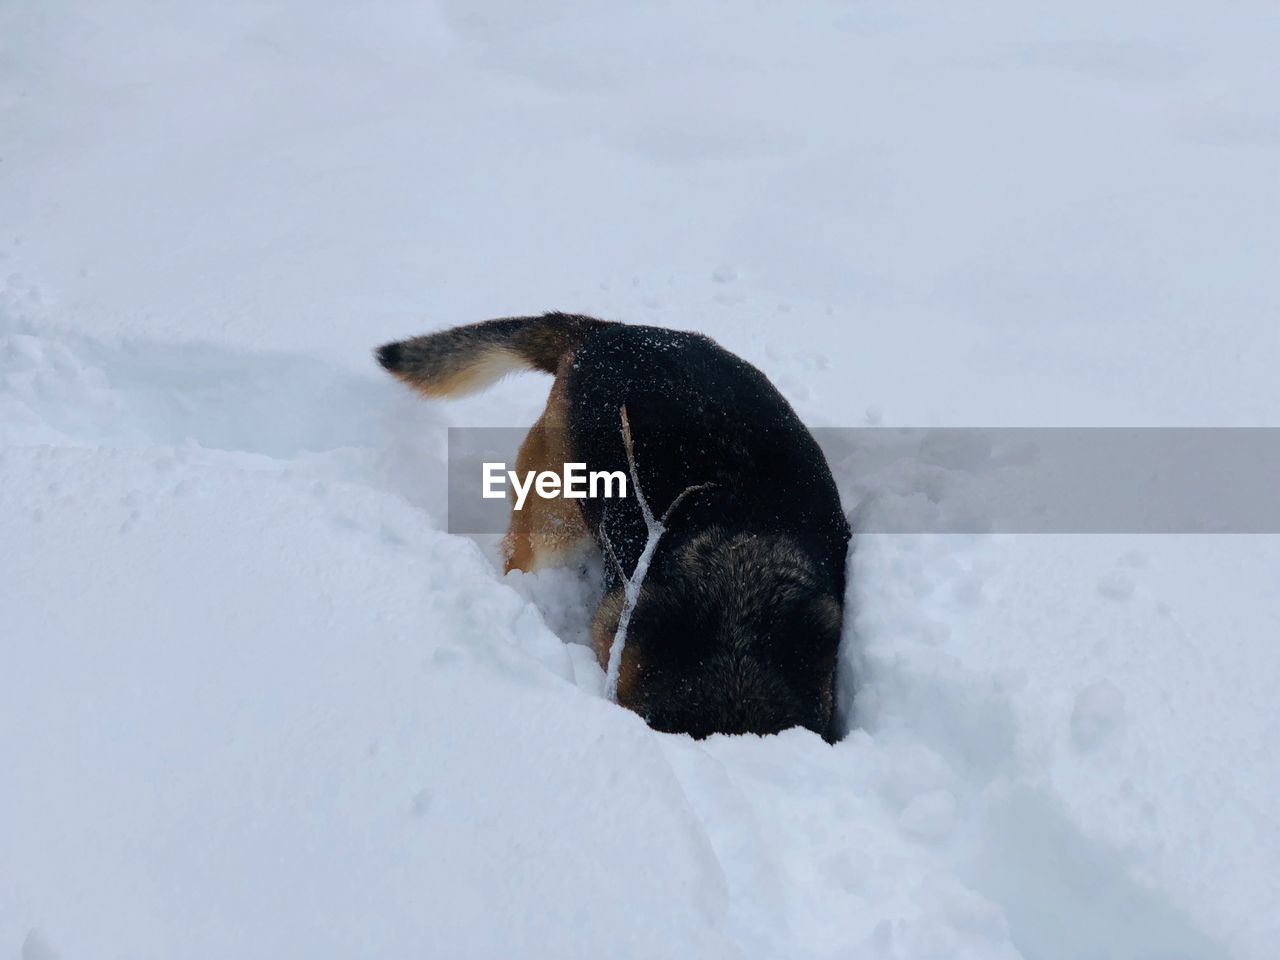 Dog digging in the snow